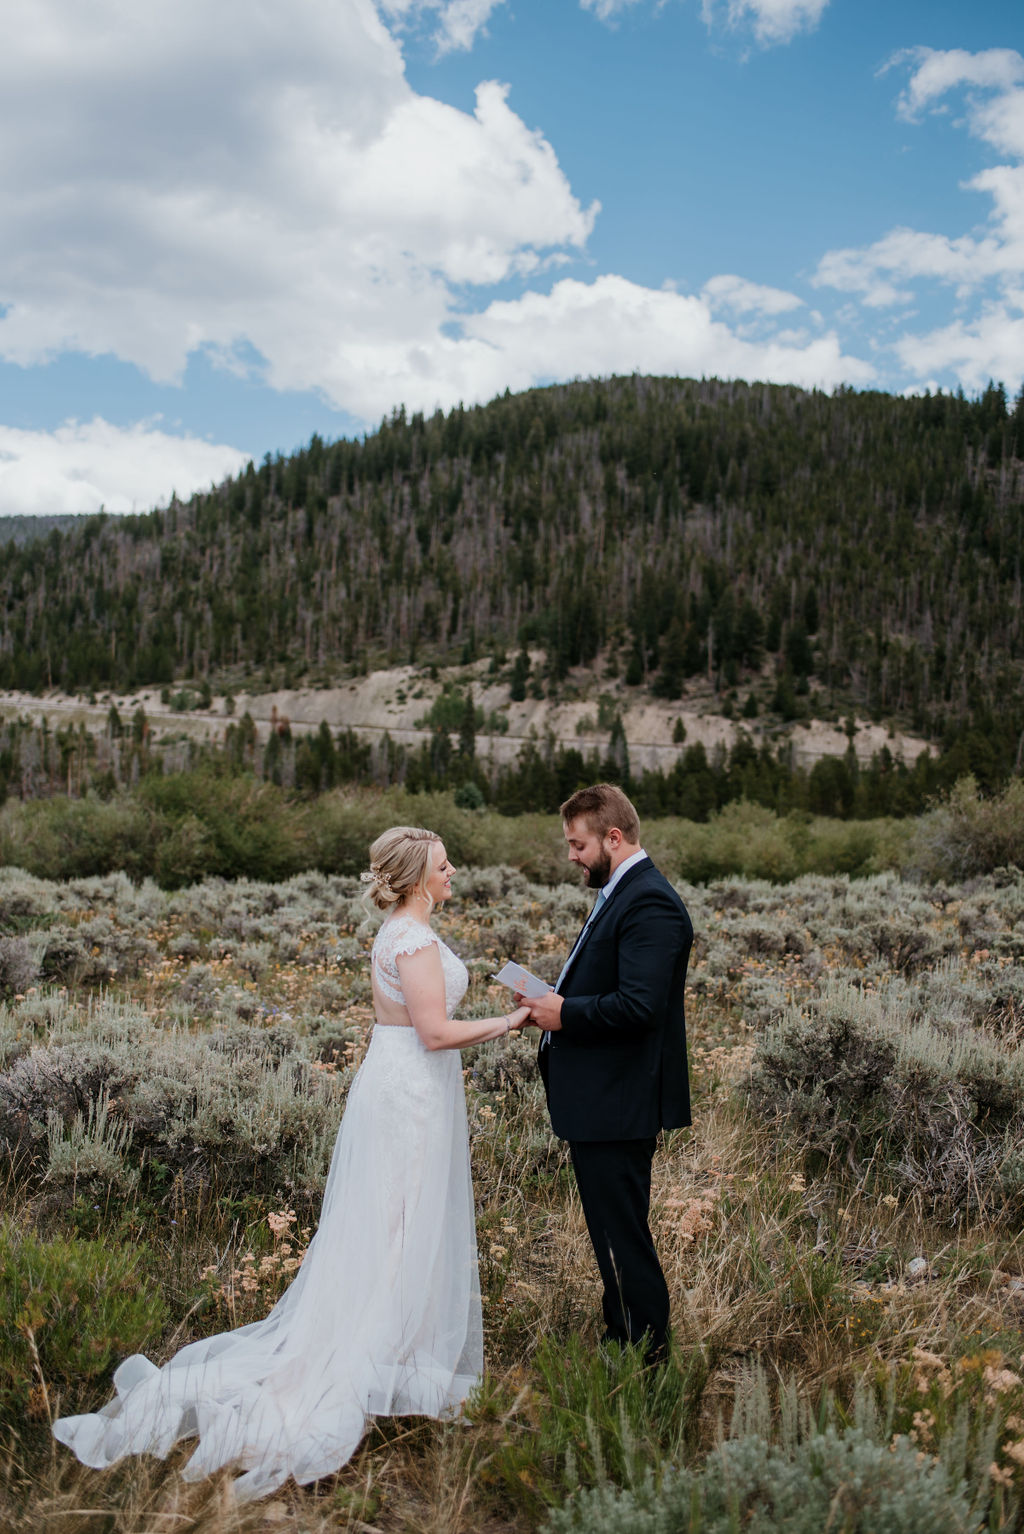 Run Away to Sapphire Point for an Epic Elopement | Mountain Side Bride